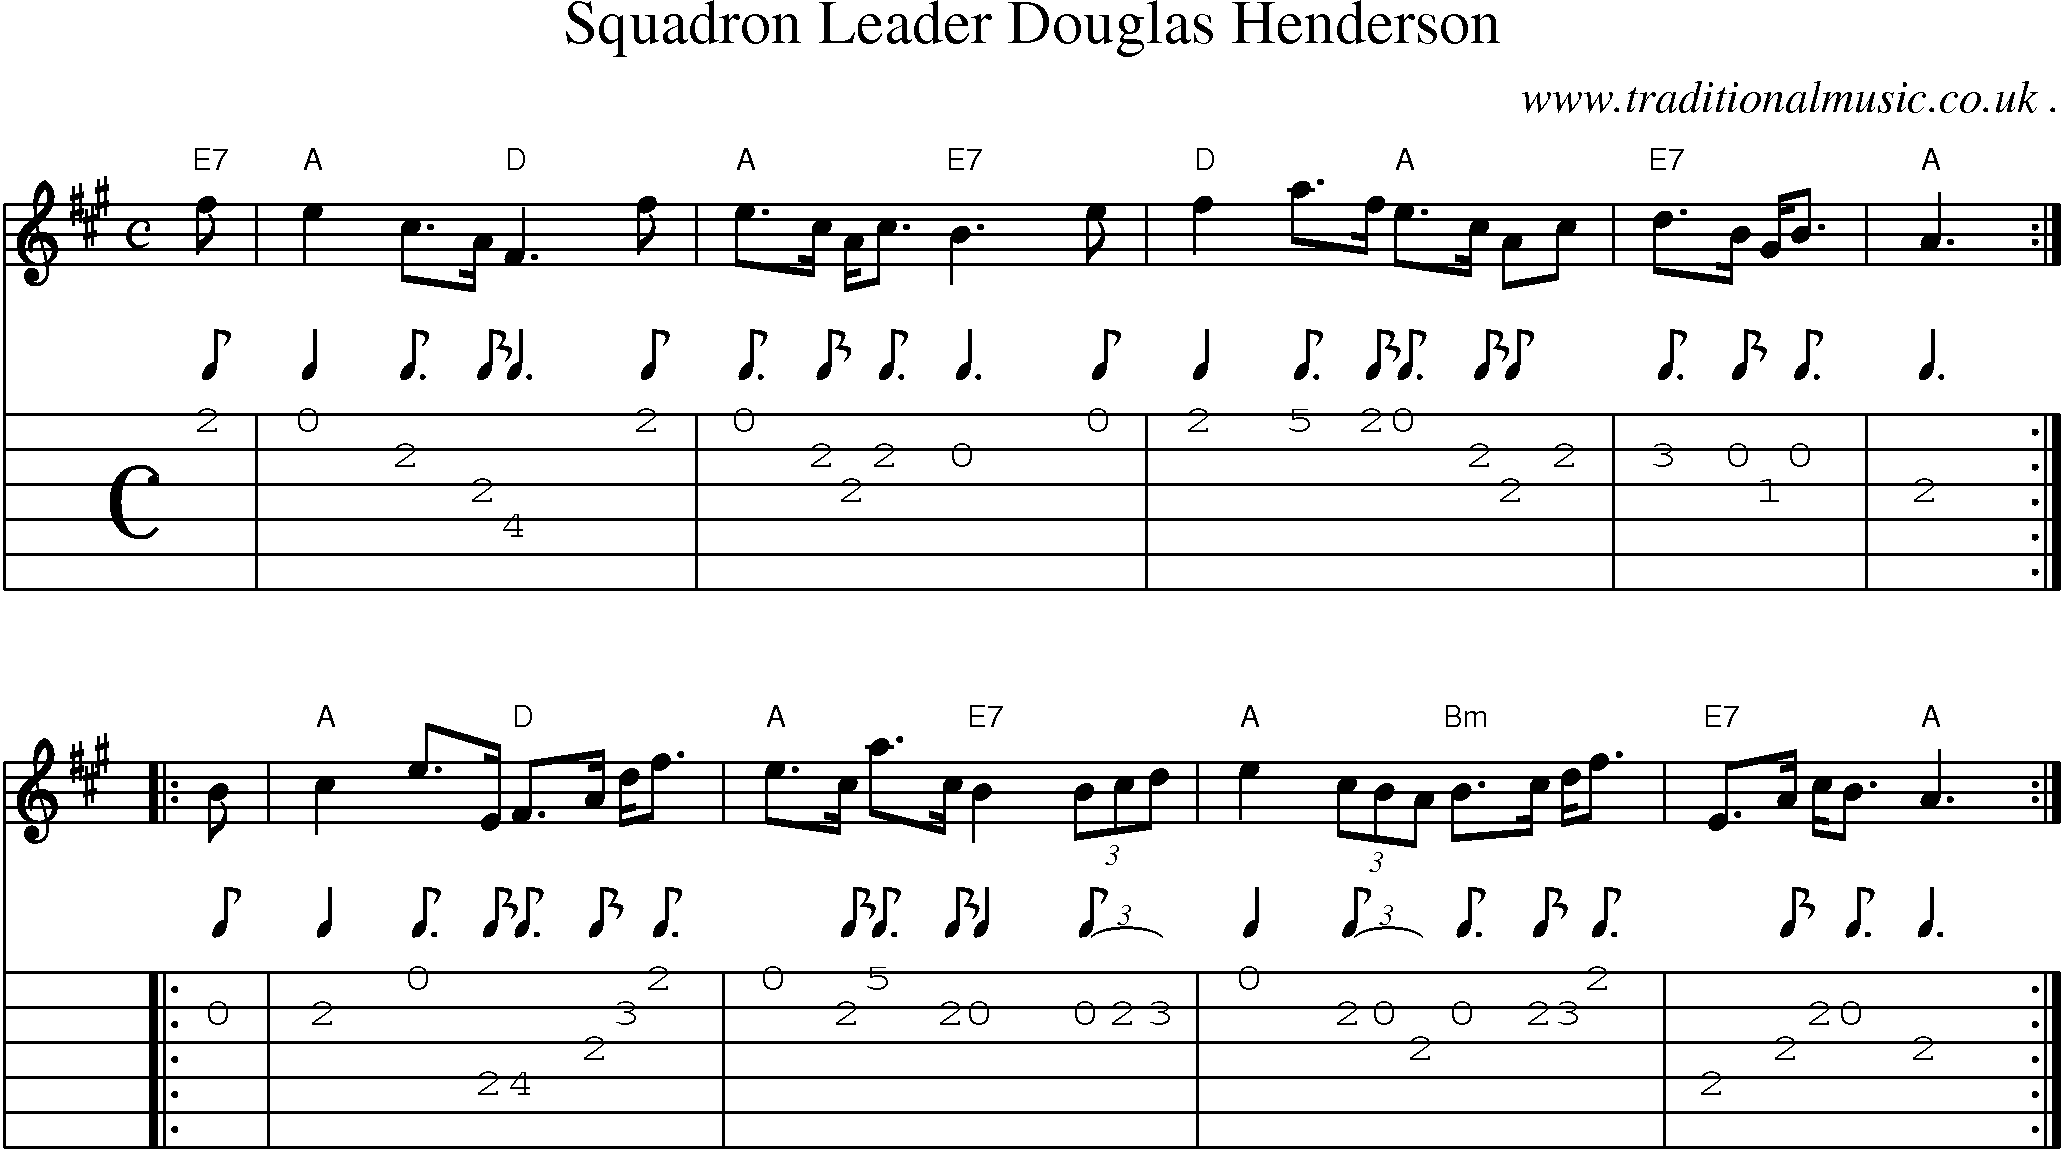 Sheet-music  score, Chords and Guitar Tabs for Squadron Leader Douglas Henderson